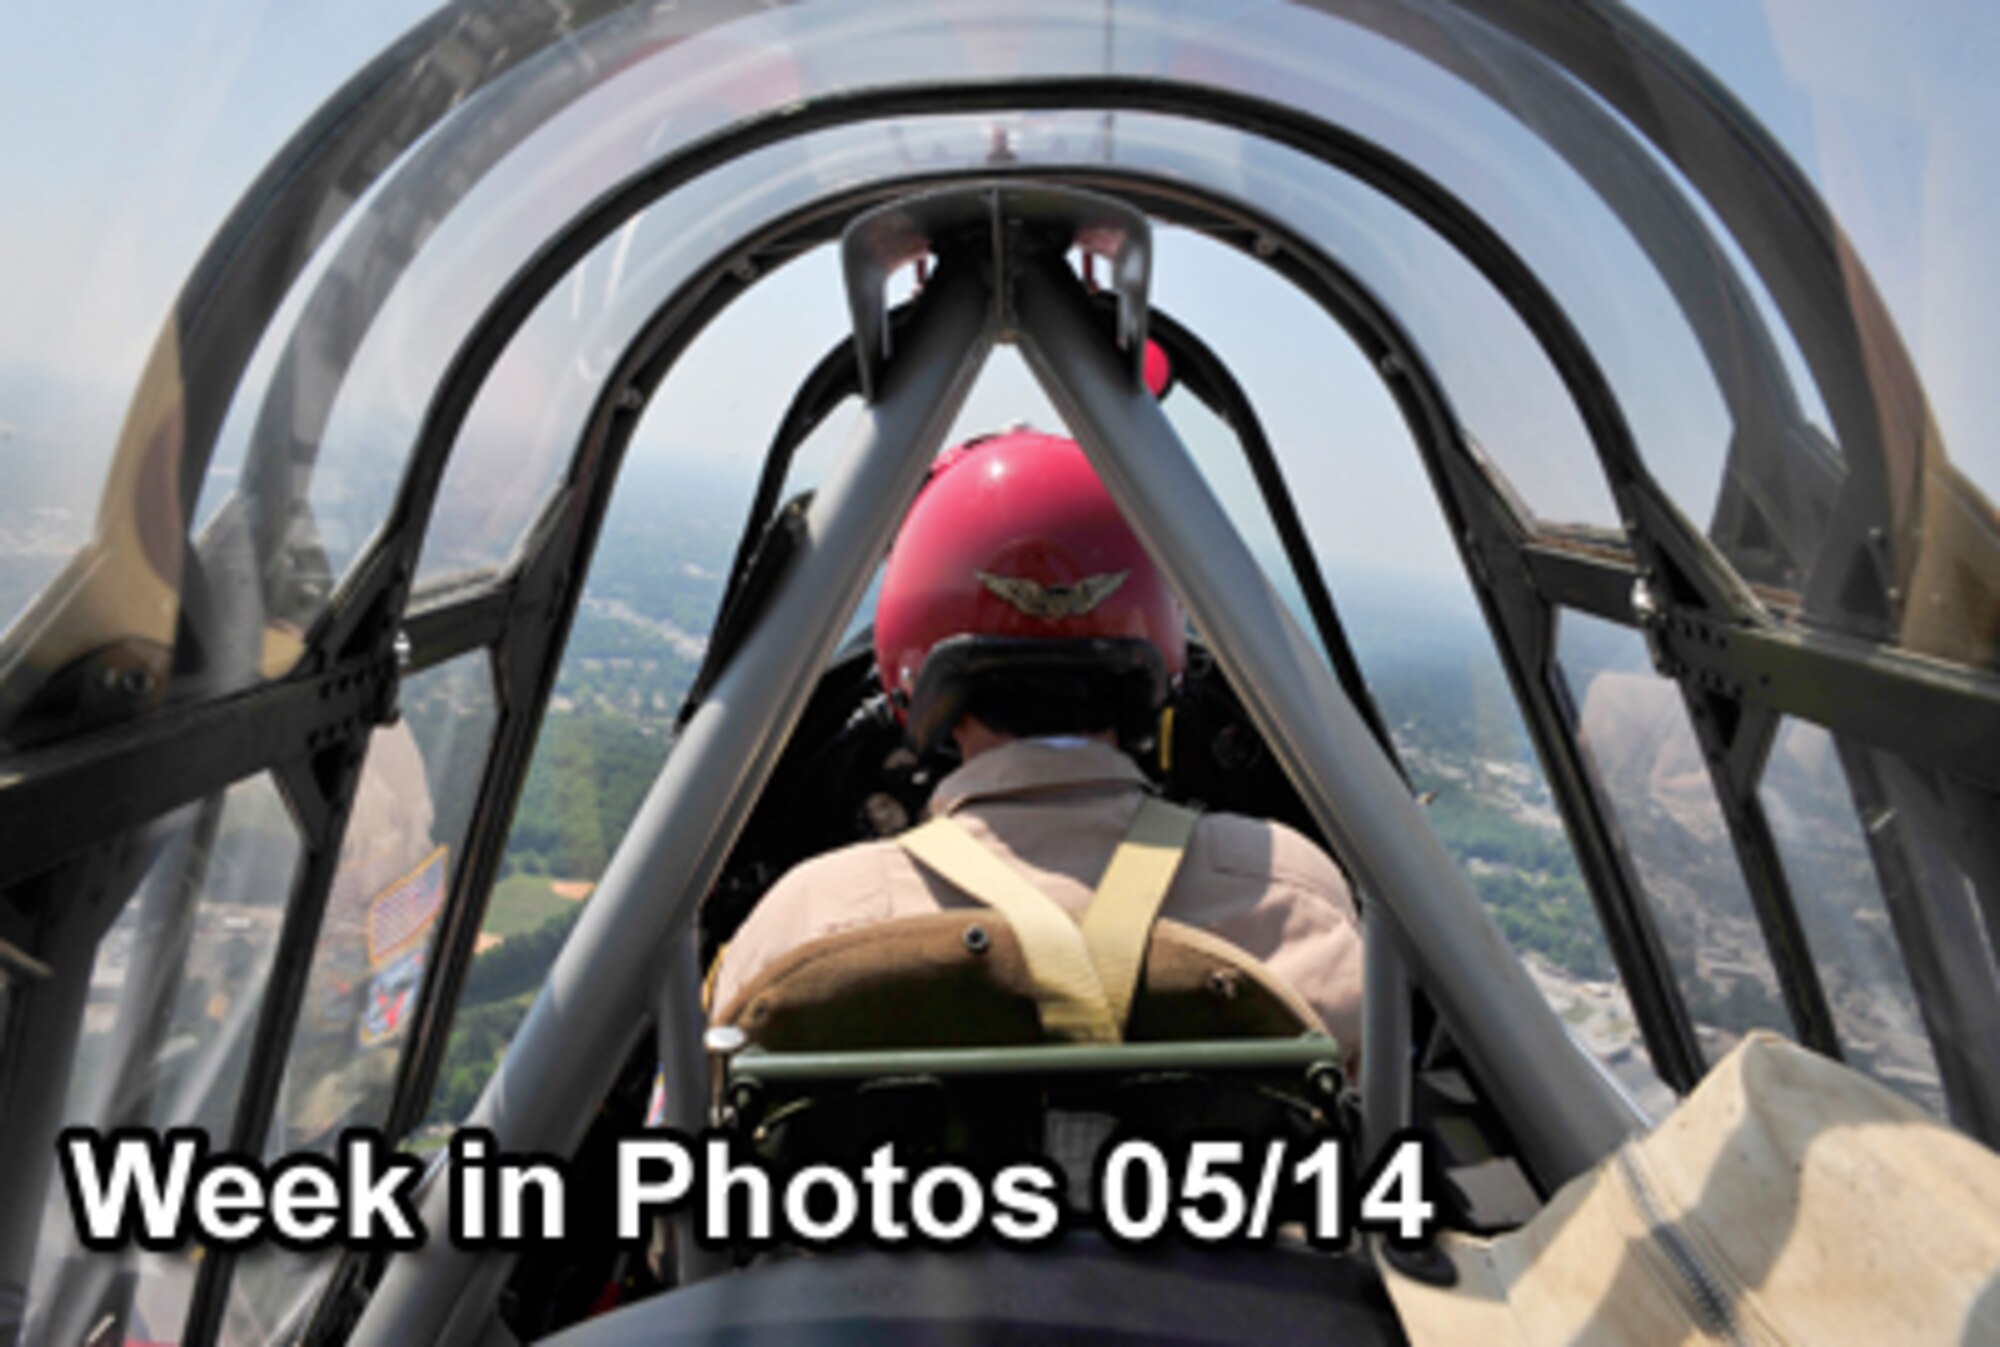 Air Force Week in Photos for May 14, 2010, highlights photos from around the Air Force. In this photo by Staff Sgt. Patrick Mitchell, an over-the-shoulder view of a pilot flying a T-6 Texan during ShawFest 2010 May 7, 2010, over Shaw Air Force Base, S. C. (U.S. Air Force photo illustration)